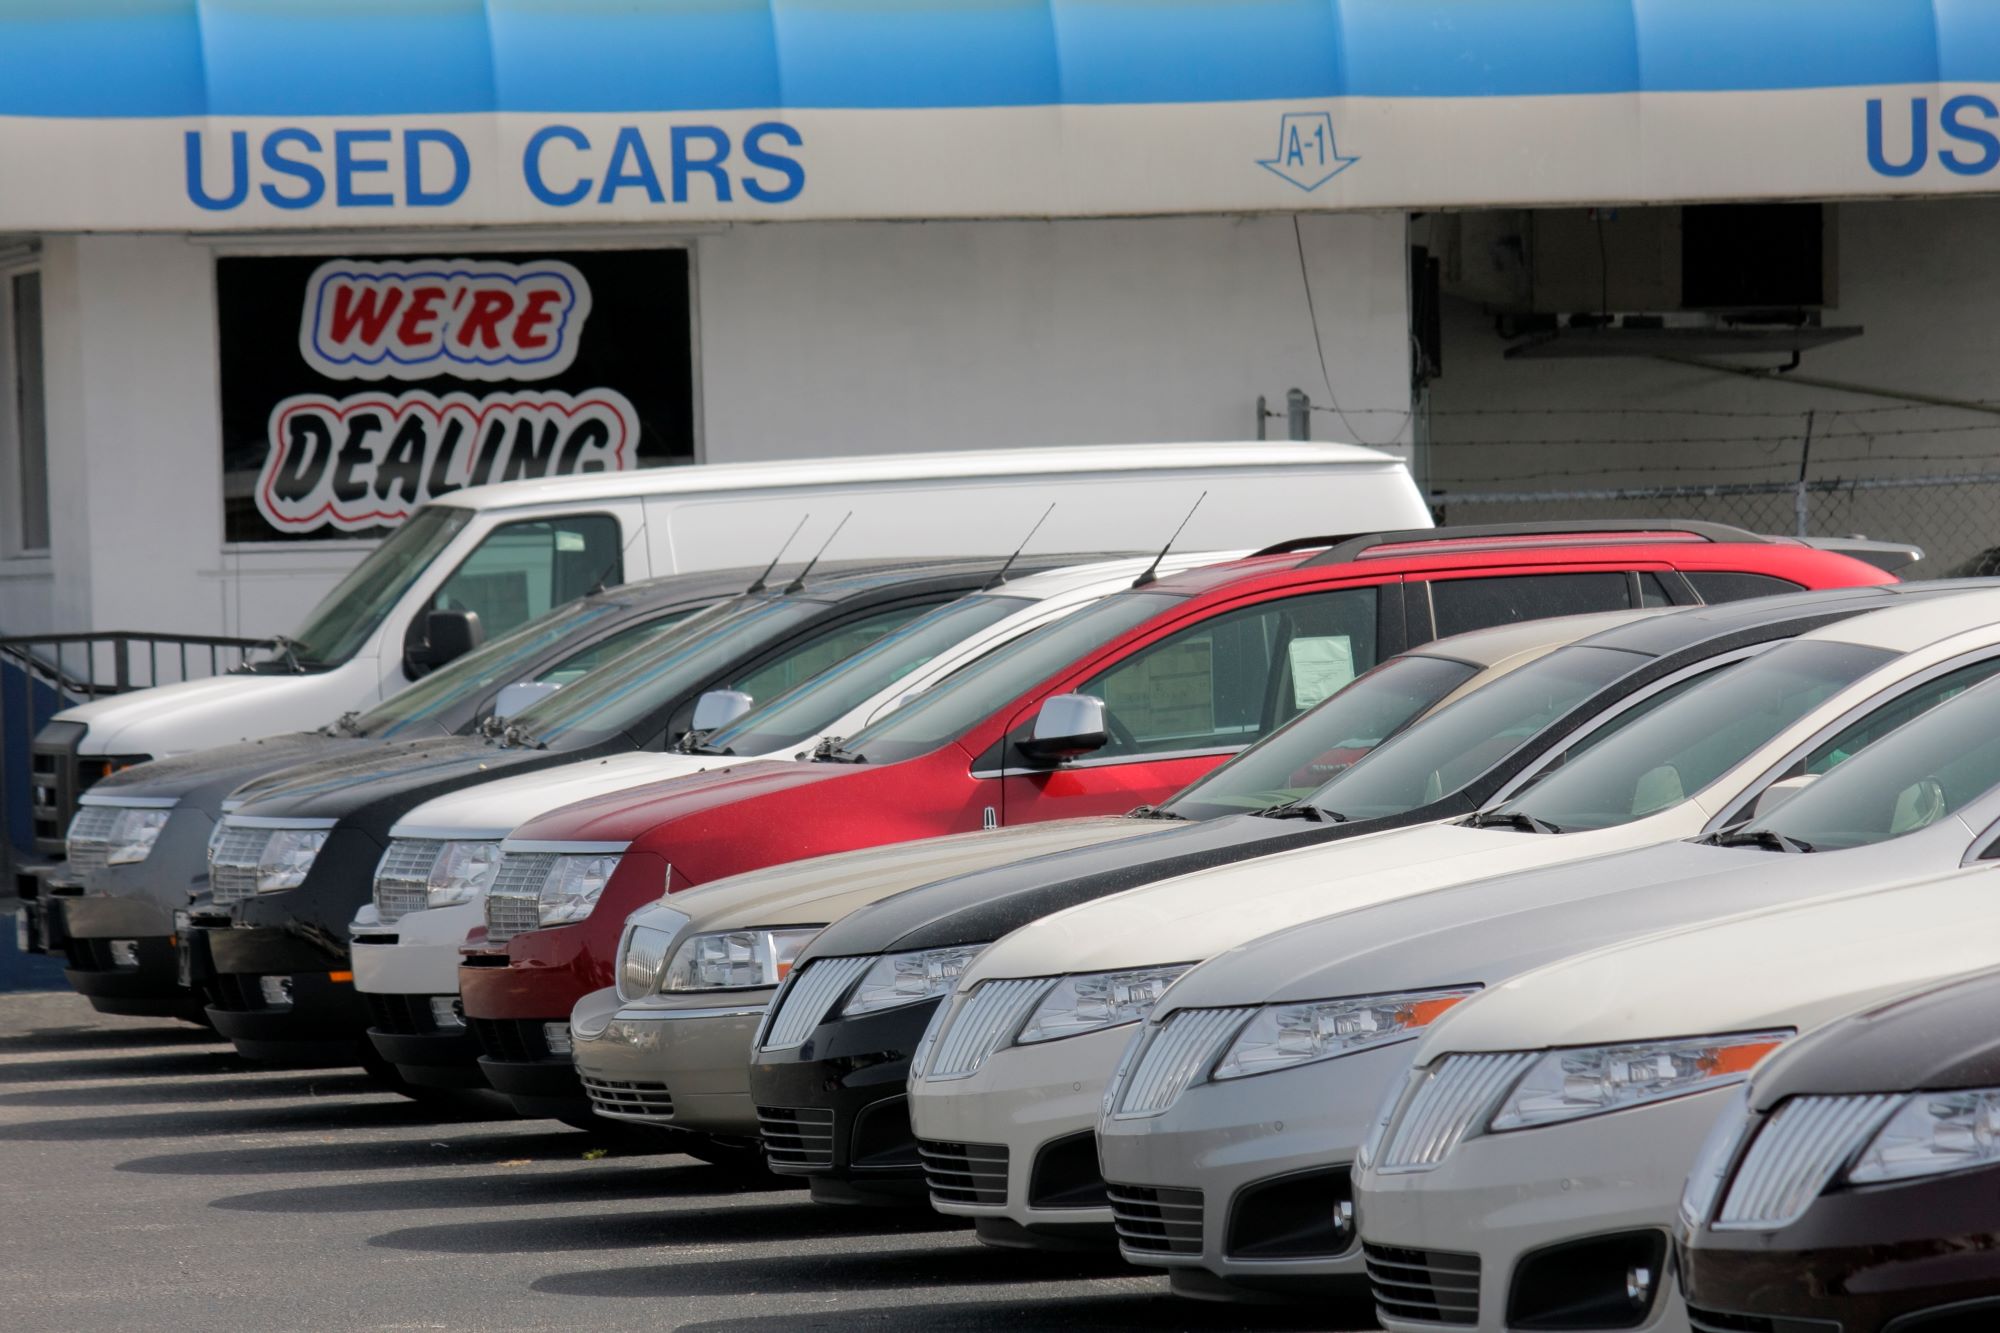 A picture of a used car lot similar to a buy here pay here with numerous cars of various colors in front of a small white building with a blue overhang that says "used cars" with a sticker in a blacked out window that says "We're Dealing."